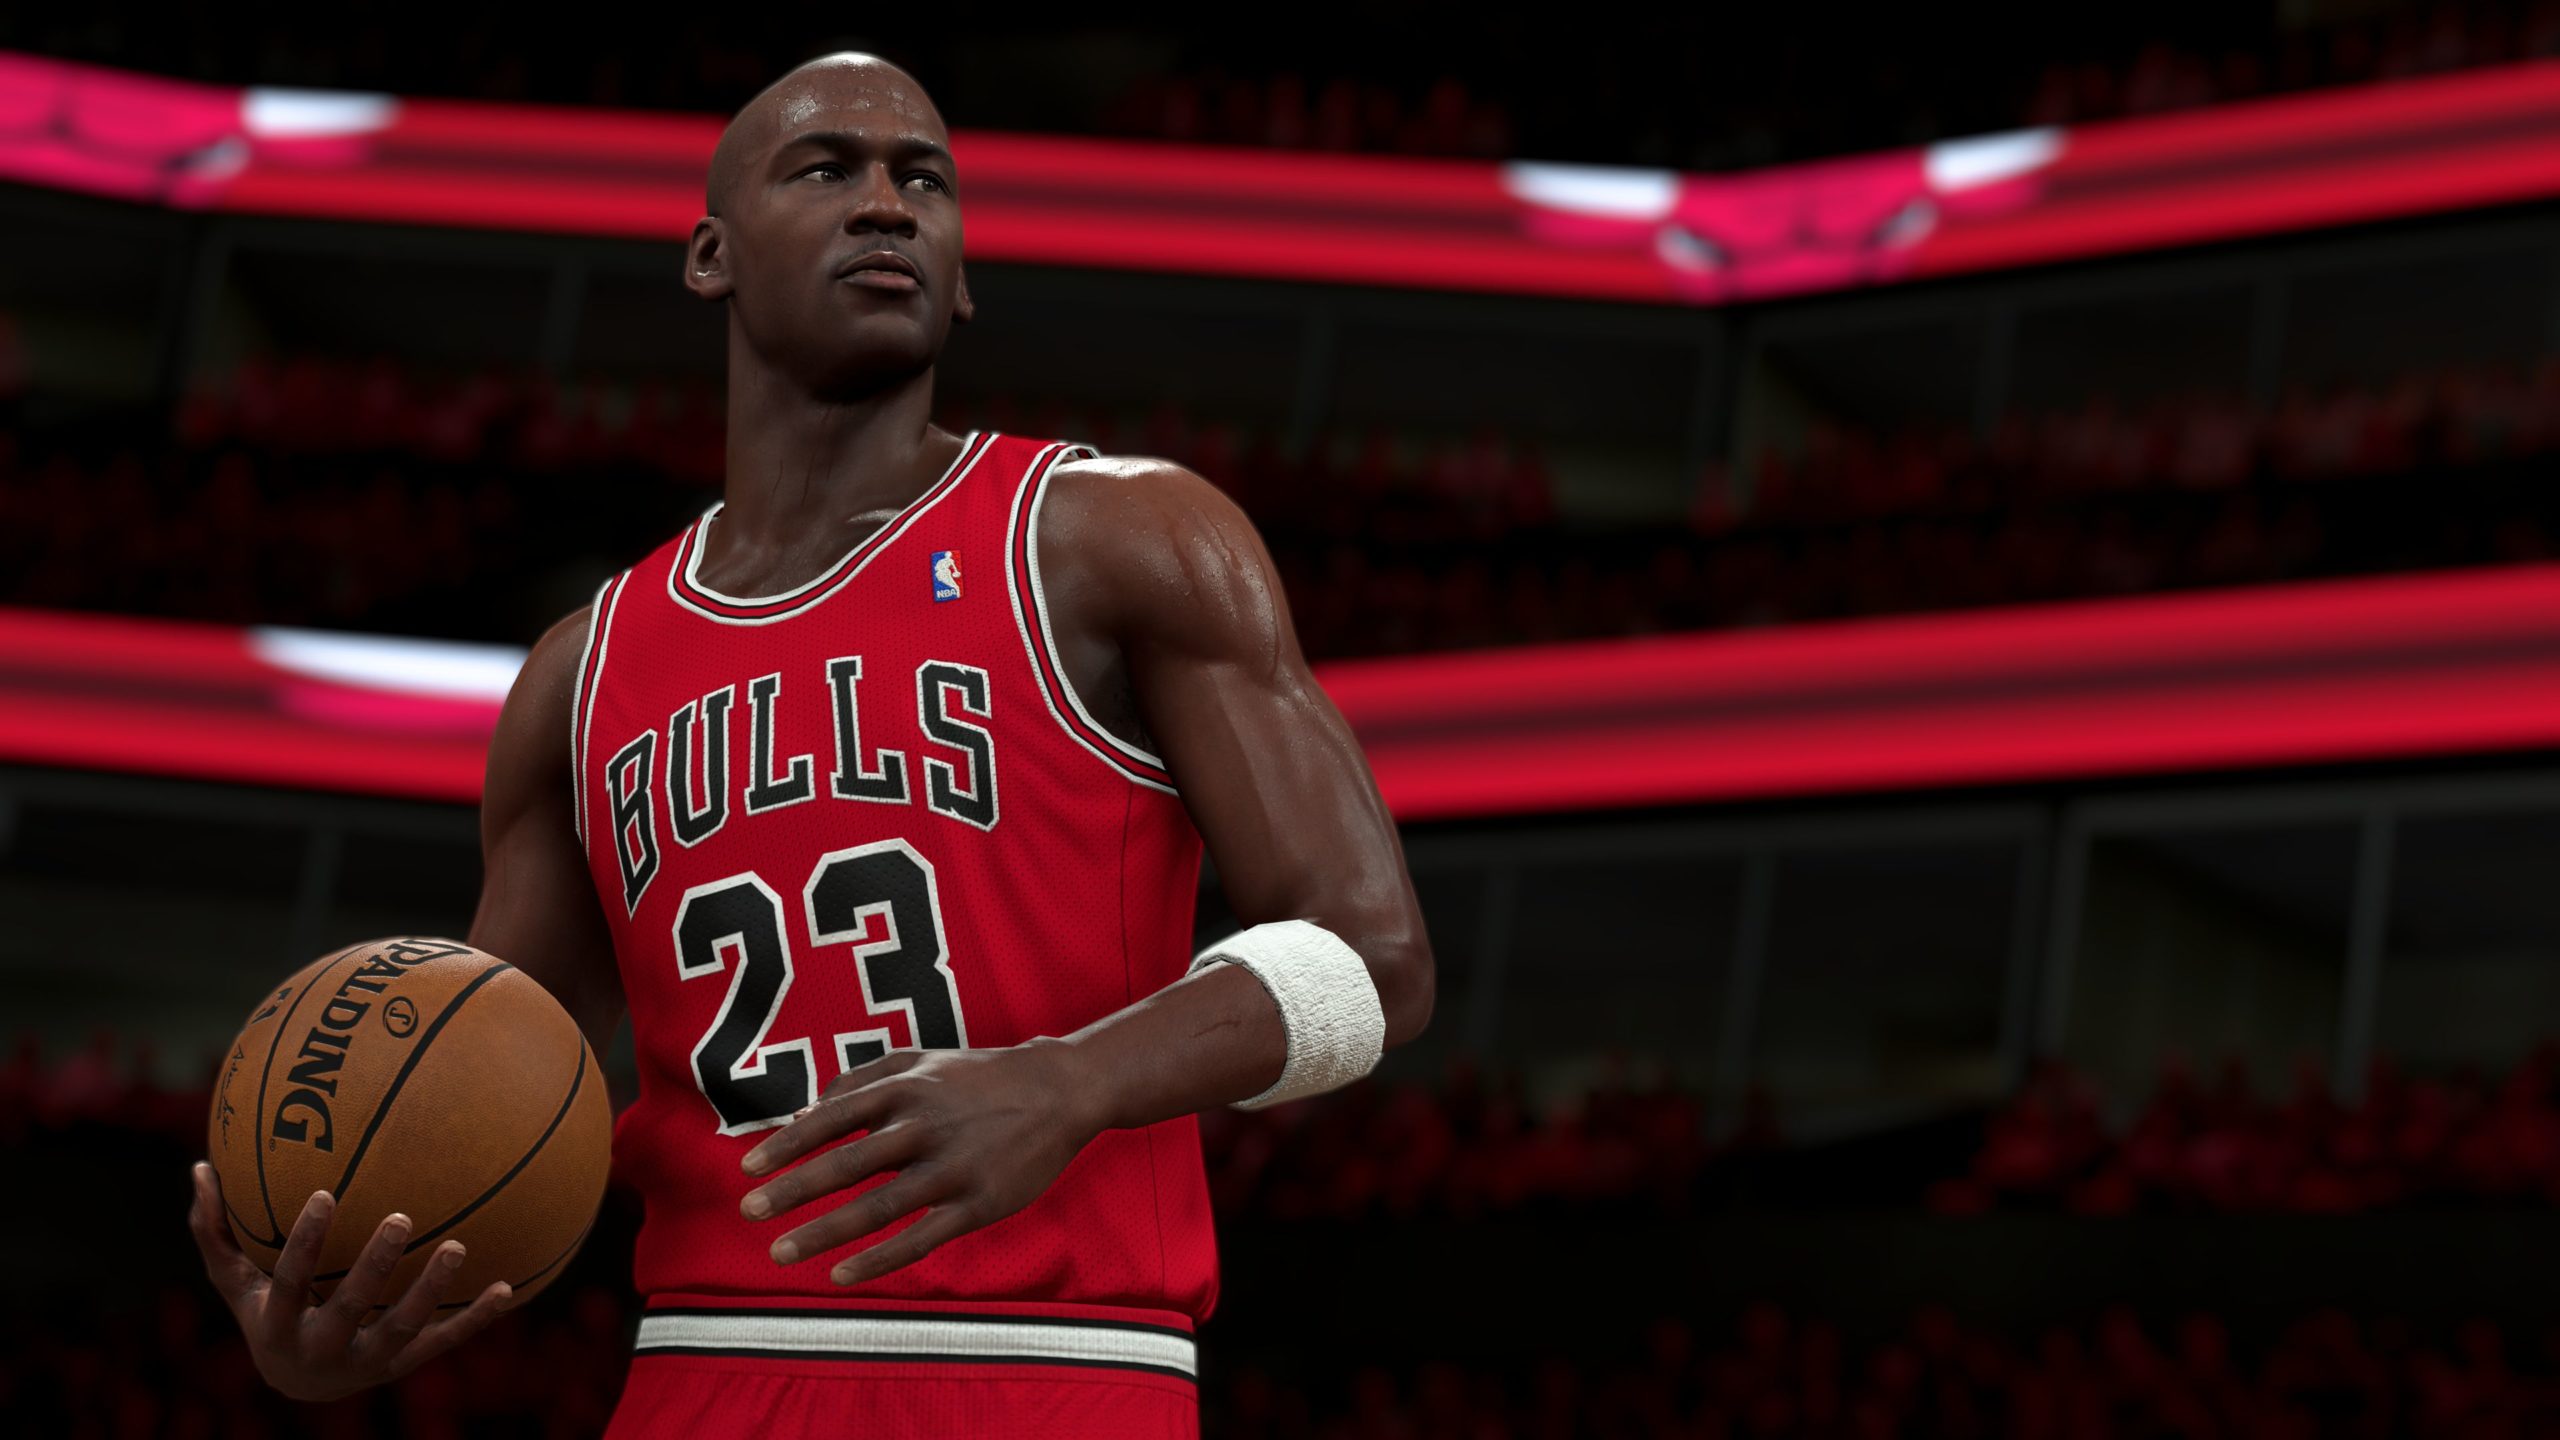 nba 2k21 3 point rating